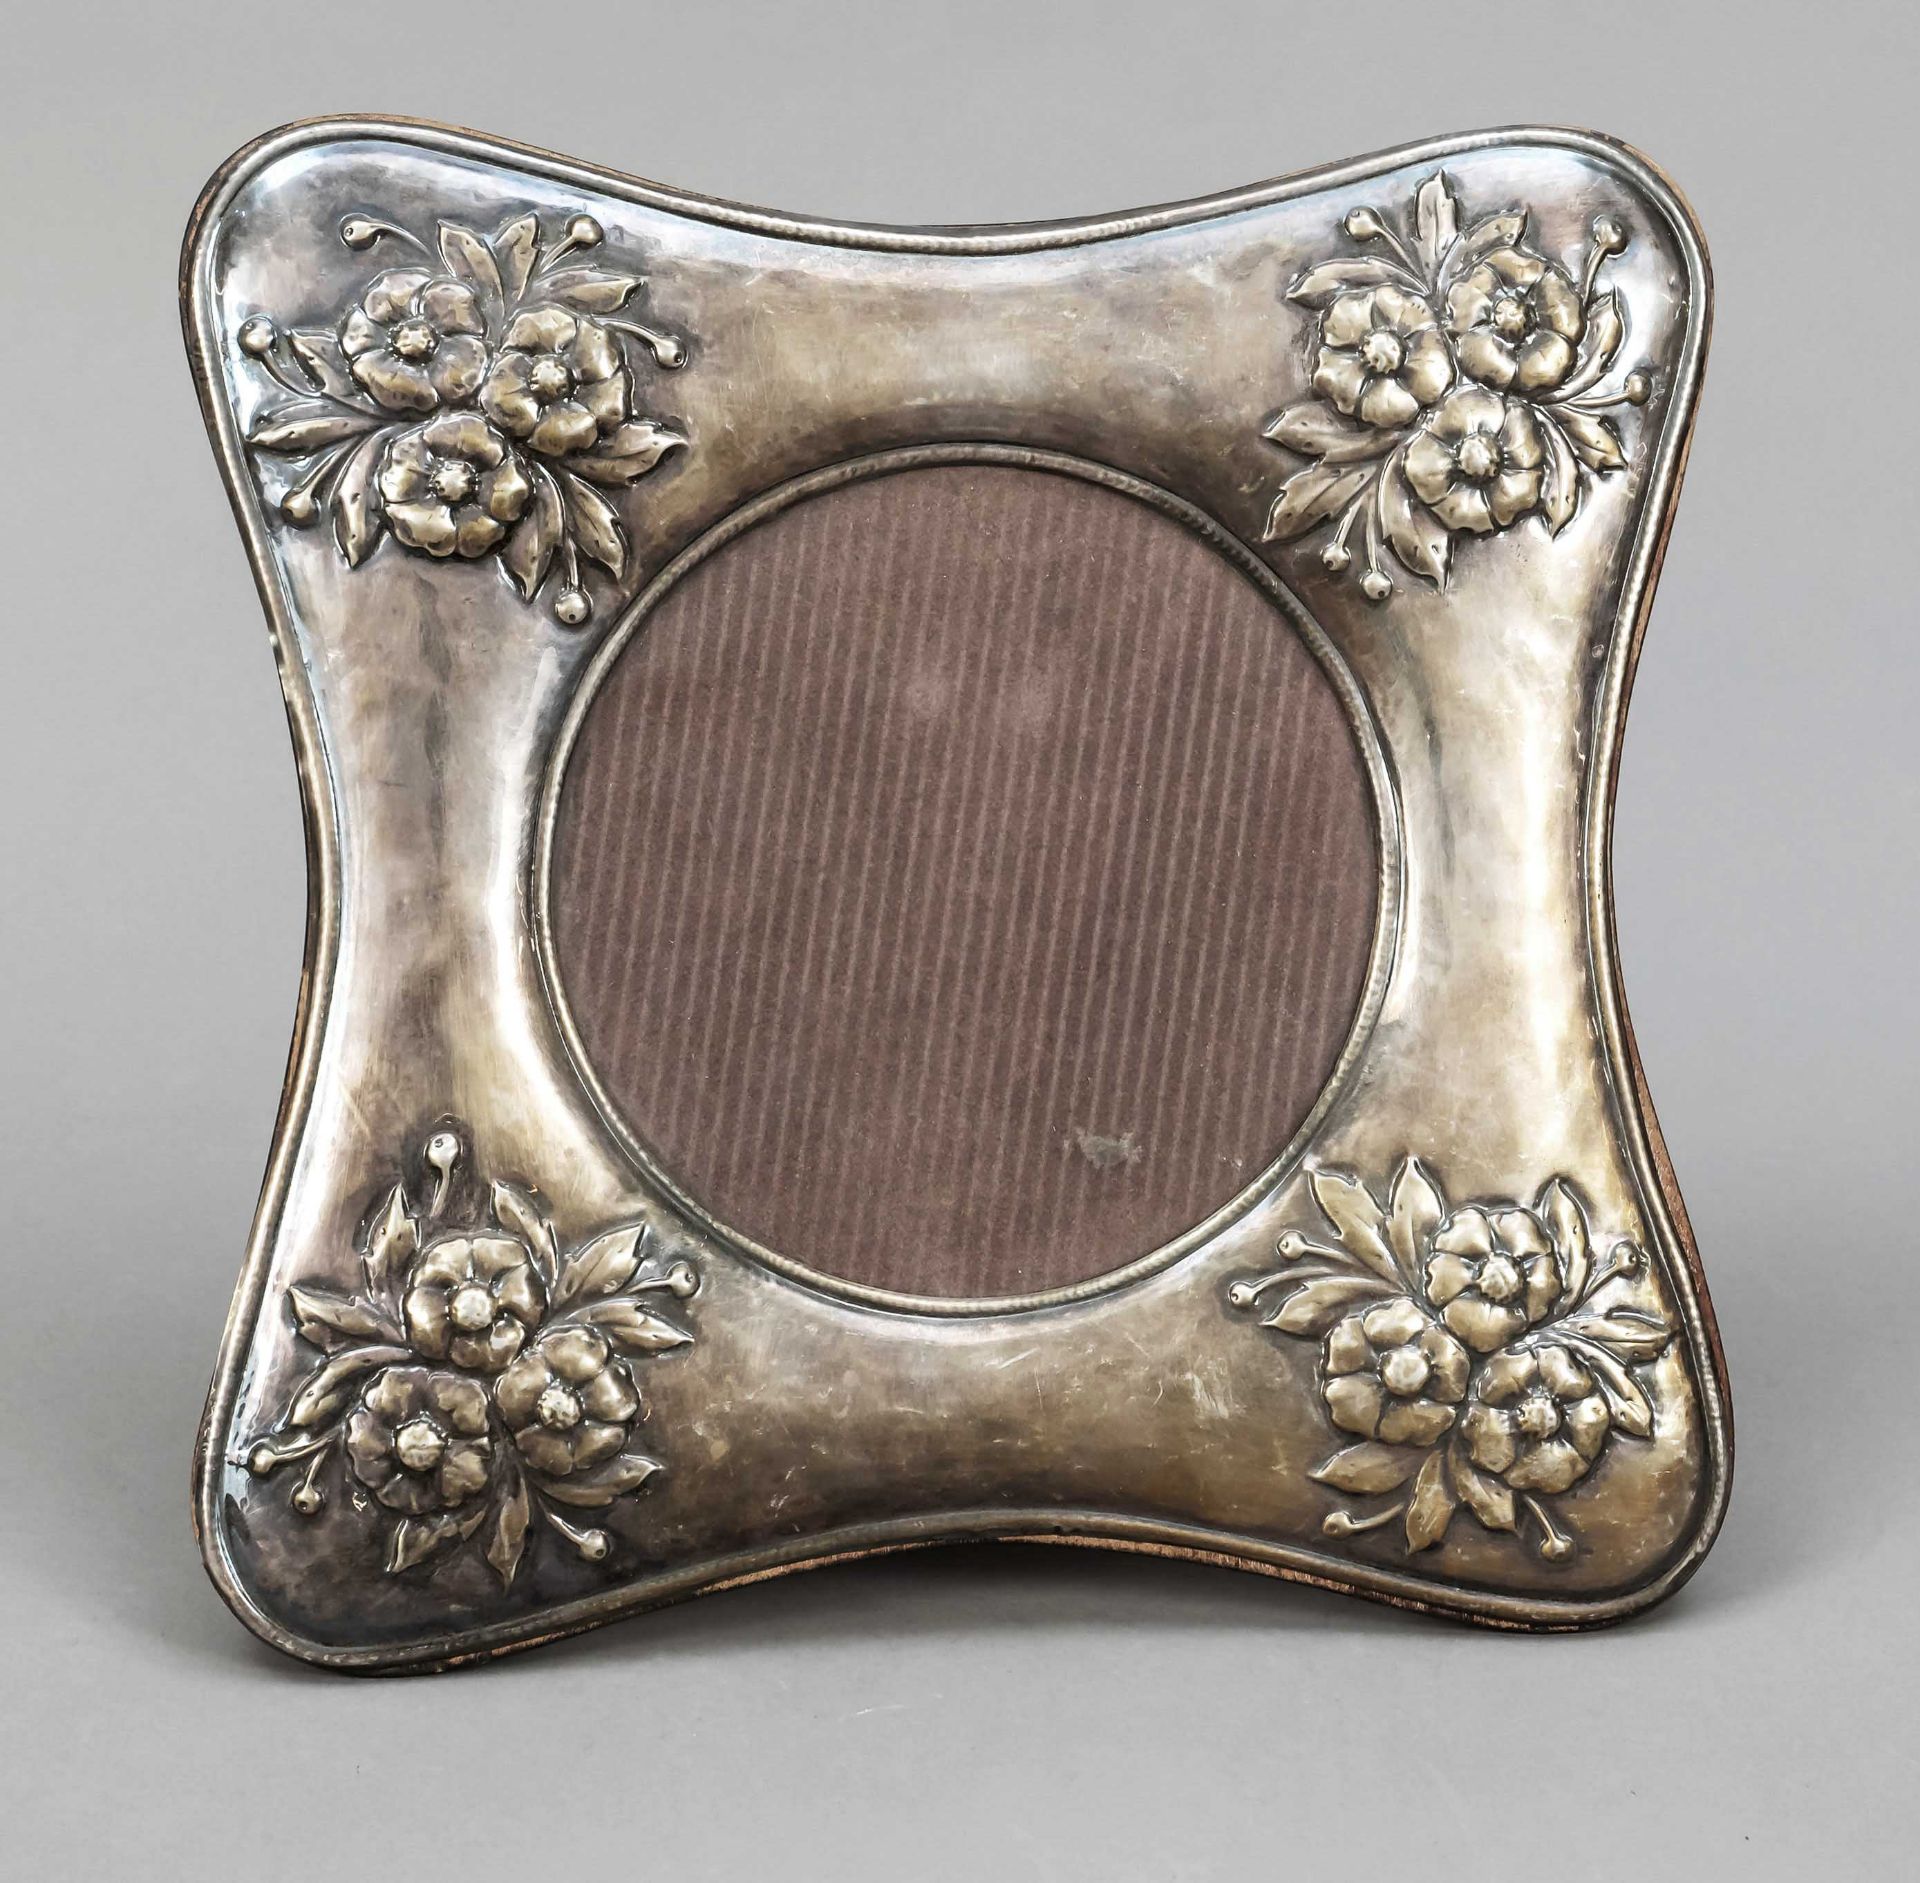 Photo stand frame, Italy, 20th century, sterling silver 925/000, square shape, on the sides with